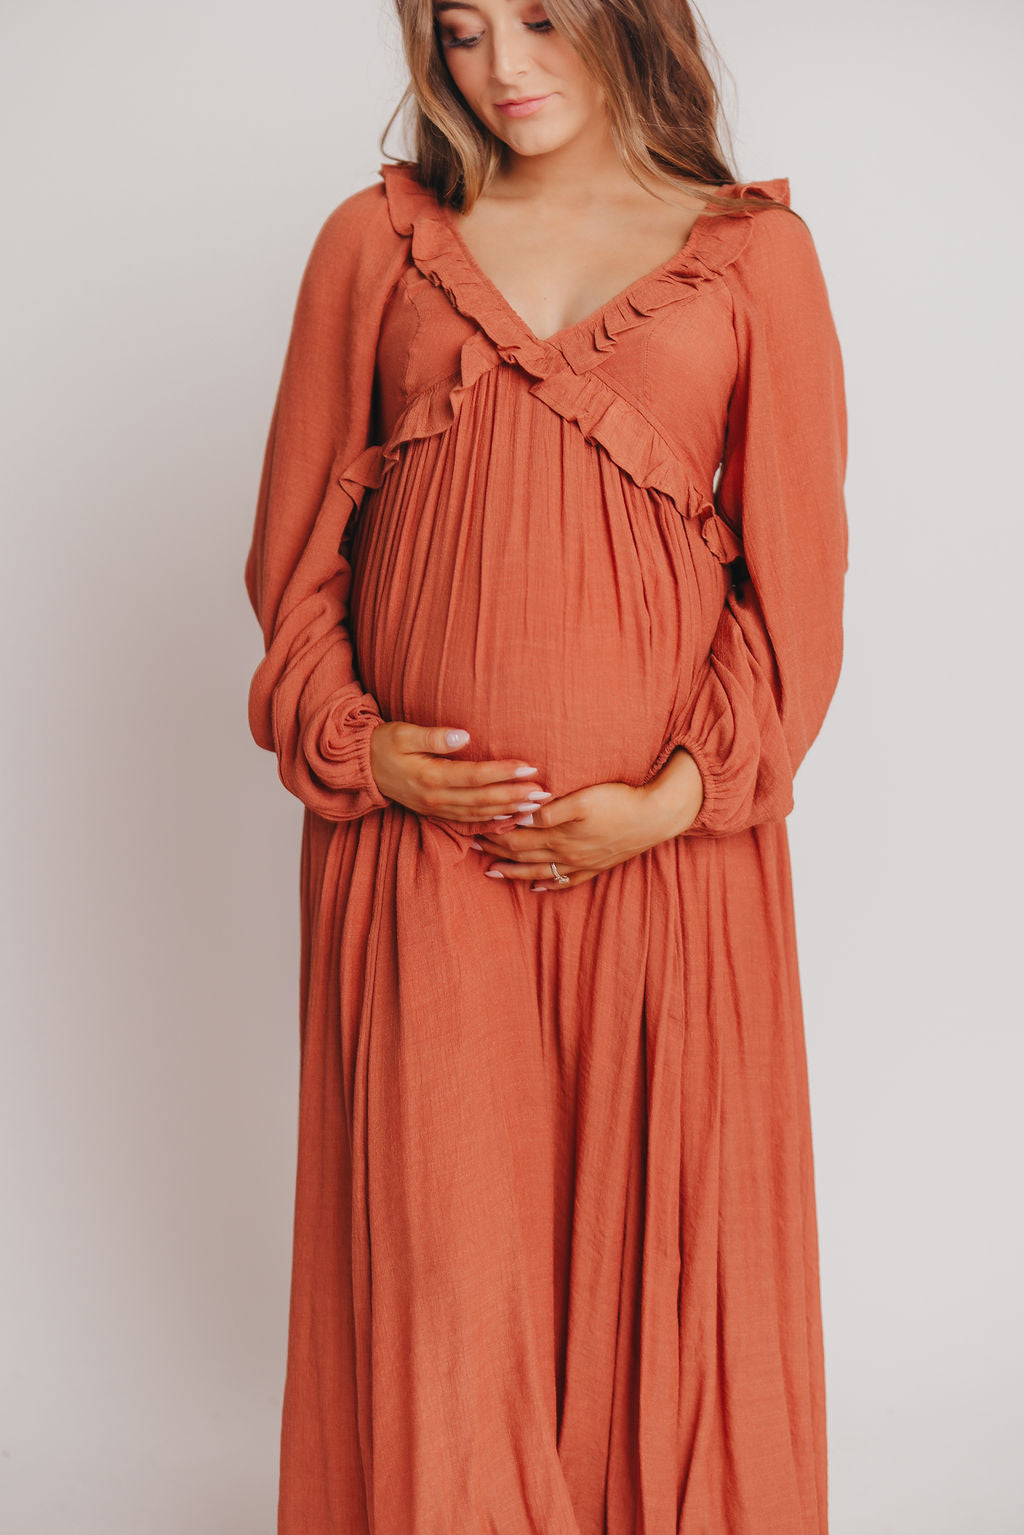 FINAL FEW! Let It Be Ruffled Maxi Dress with Plunging Neckline in Terracotta - Bump Friendly - INCLUSIVE SIZING S-2XL (Cannot Restock)